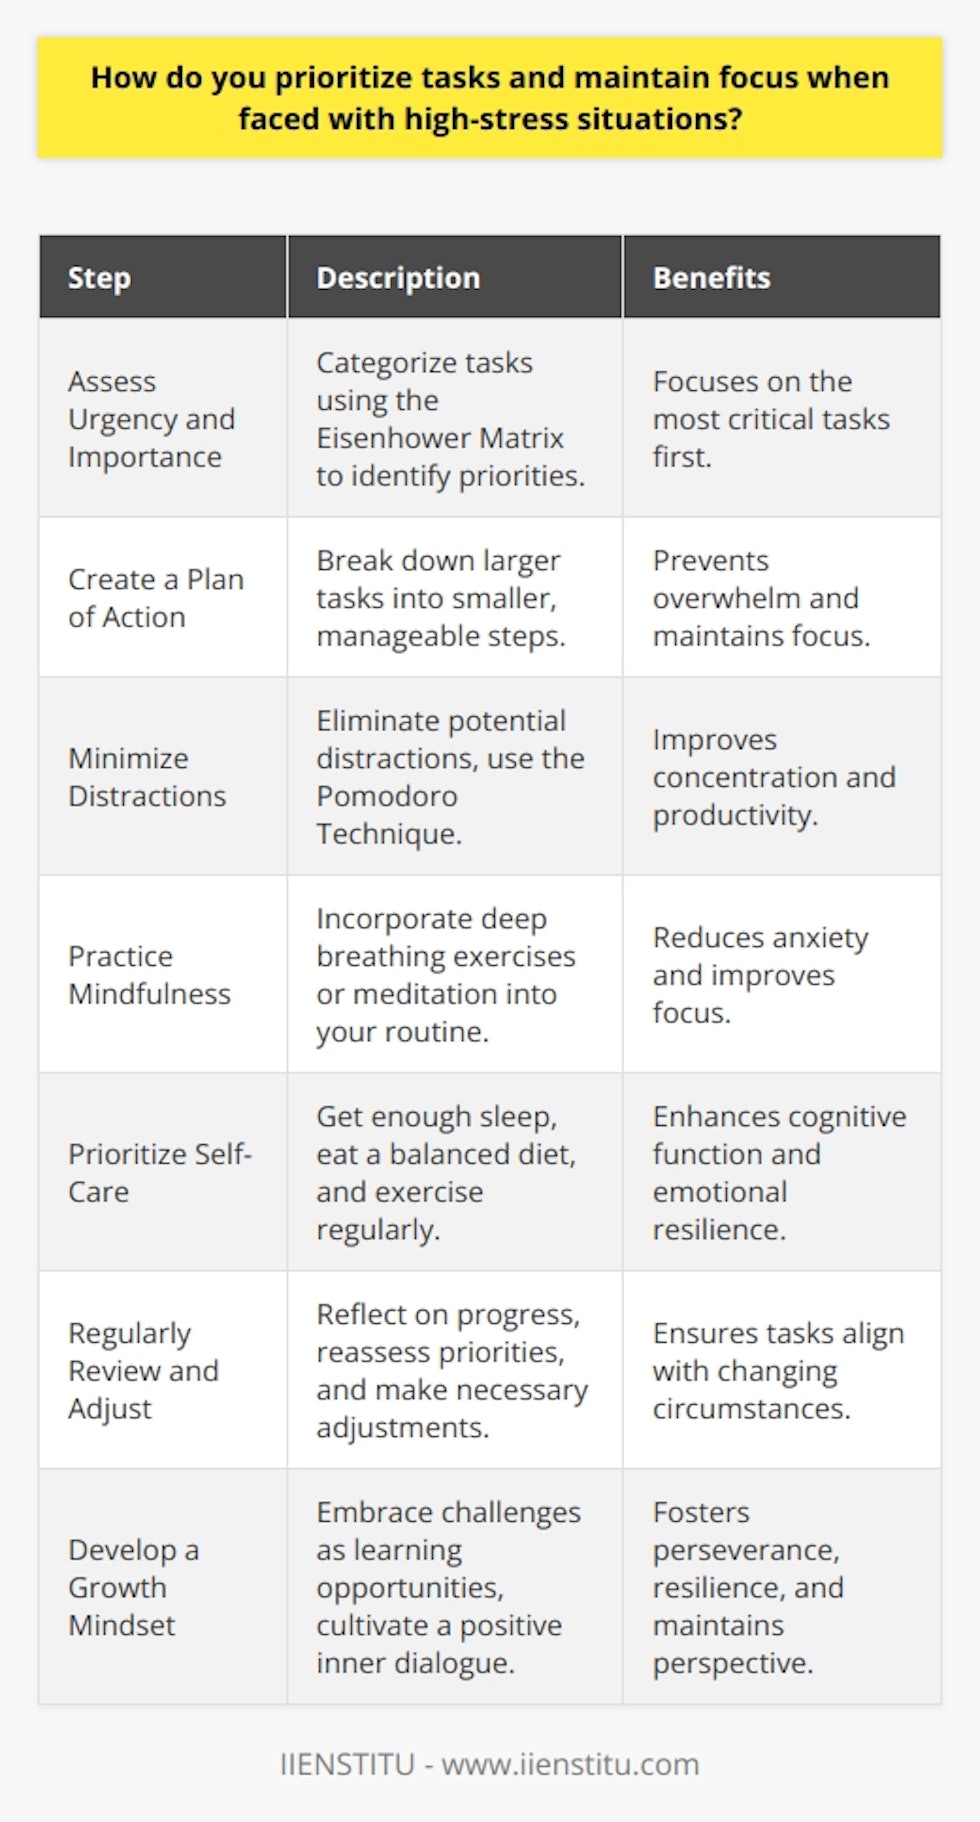 Prioritizing tasks and maintaining focus in high-stress situations require a systematic approach and mental discipline. The first step is to assess the urgency and importance of each task. Urgent tasks demand immediate attention, while important tasks contribute to long-term goals. By categorizing tasks using the Eisenhower Matrix, one can identify which tasks to tackle first. Once priorities are set, its crucial to create a plan of action. Breaking down larger tasks into smaller, manageable steps helps maintain focus and prevents overwhelm. Minimize Distractions Distractions are a significant hindrance to maintaining focus, especially in high-stress situations. Identify and eliminate potential distractions, such as turning off notifications on devices or finding a quiet workspace. Implementing the Pomodoro Technique, which involves working in focused 25-minute intervals followed by short breaks, can help maintain concentration. During these intervals, give your full attention to the task at hand. If distracting thoughts arise, jot them down to address later, allowing you to quickly refocus on the current task. Practice Mindfulness Mindfulness is a powerful tool for maintaining focus and reducing stress. Take short breaks throughout the day to practice deep breathing exercises or meditation. These practices help clear the mind, reduce anxiety, and improve overall focus. Incorporating mindfulness into your daily routine can increase your ability to stay present and engaged, even in high-pressure situations. Prioritize Self-Care Taking care of your physical and mental well-being is essential for maintaining focus and managing stress. Ensure you get enough sleep, eat a balanced diet, and engage in regular exercise. These habits contribute to improved cognitive function and emotional resilience. Additionally, dont hesitate to reach out for support when needed. Collaborating with colleagues or seeking guidance from mentors can help you navigate challenging situations and maintain focus on your goals. Regularly Review and Adjust As circumstances change, its essential to regularly review and adjust your priorities. Reflect on your progress, reassess the importance of tasks, and make necessary adjustments to your plan. Celebrate your accomplishments along the way, as this helps maintain motivation and focus. By remaining adaptable and proactive in your approach, you can effectively prioritize tasks and maintain focus, even in the face of high-stress situations. Develop a Growth Mindset Adopting a growth mindset is crucial for maintaining focus and navigating high-stress situations. Embrace challenges as opportunities for learning and development, rather than viewing them as threats. Reframe negative self-talk and cultivate a positive inner dialogue that encourages perseverance and resilience. By viewing setbacks as temporary and focusing on the lessons learned, you can maintain a sense of perspective and stay focused on your goals. Conclusion Prioritizing tasks and maintaining focus in high-stress situations require a combination of strategic planning, mental discipline, and self-care. By assessing the importance and urgency of tasks, minimizing distractions, practicing mindfulness, prioritizing self-care, regularly reviewing and adjusting, and developing a growth mindset, individuals can effectively navigate challenging circumstances and maintain focus on their goals. With practice and persistence, these strategies can become habitual, enabling one to thrive in even the most demanding situations.